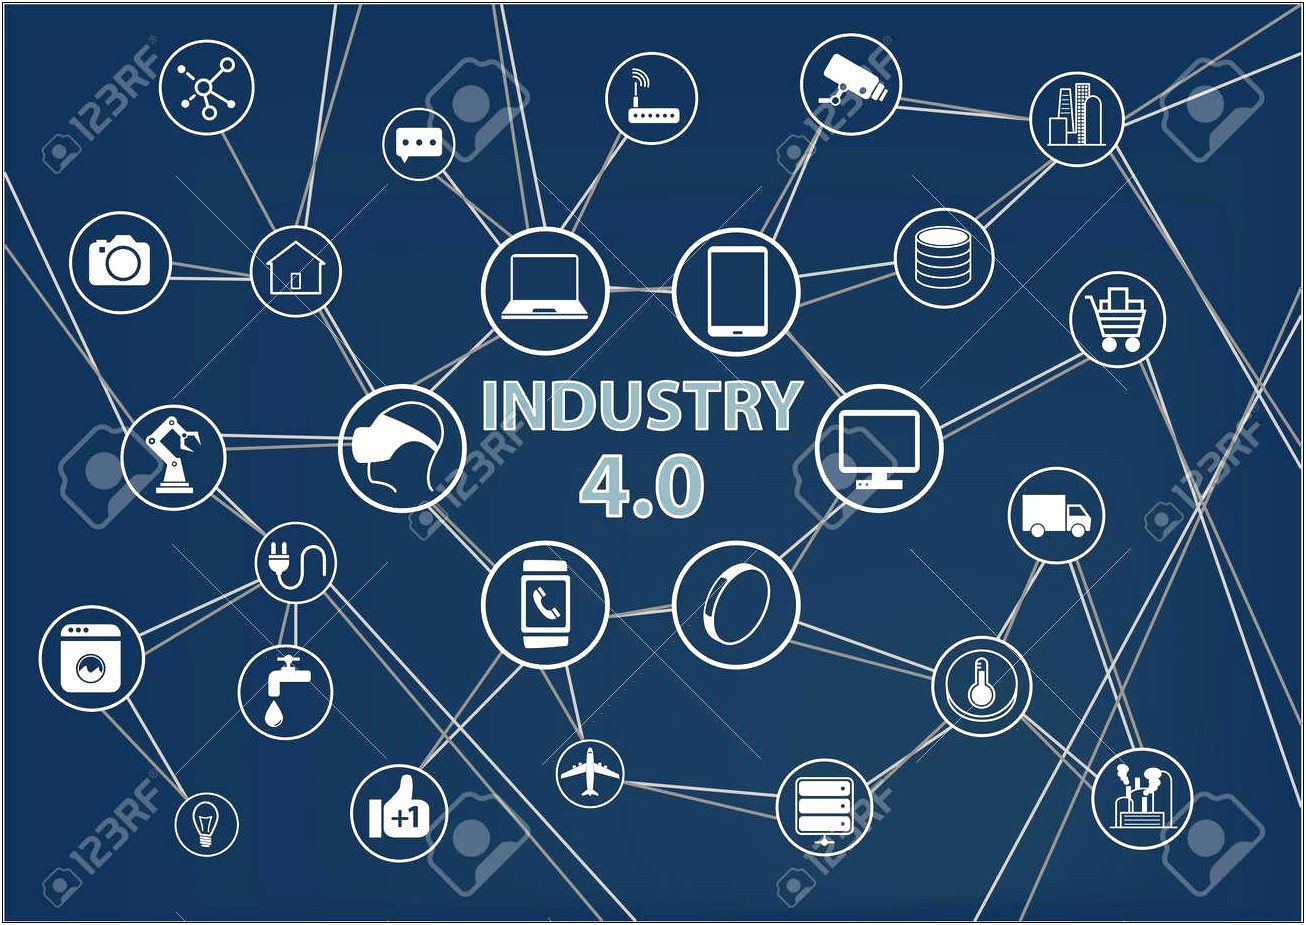 Free Industry 4.0 Ppt Template